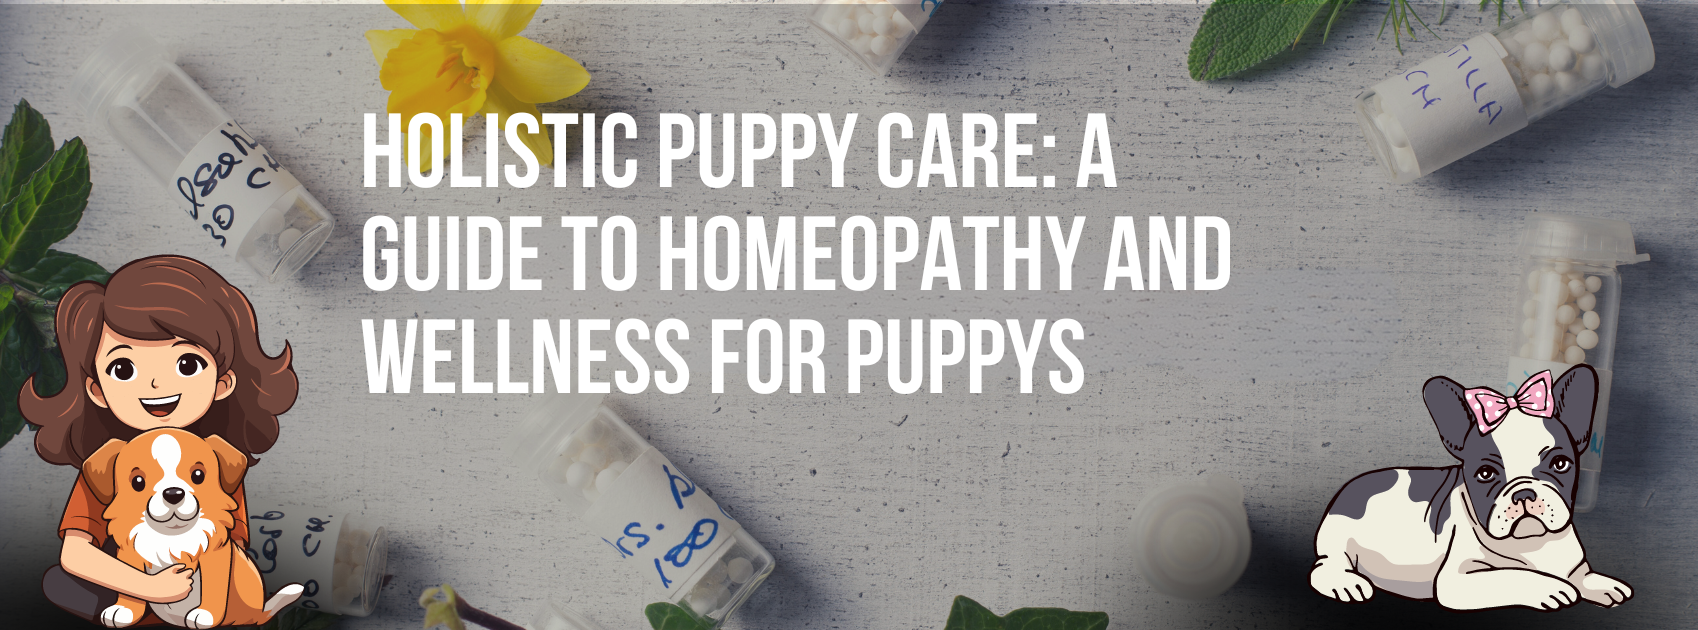 Holistic Puppy Care: A Guide to Homeopathy and Wellness for Puppys